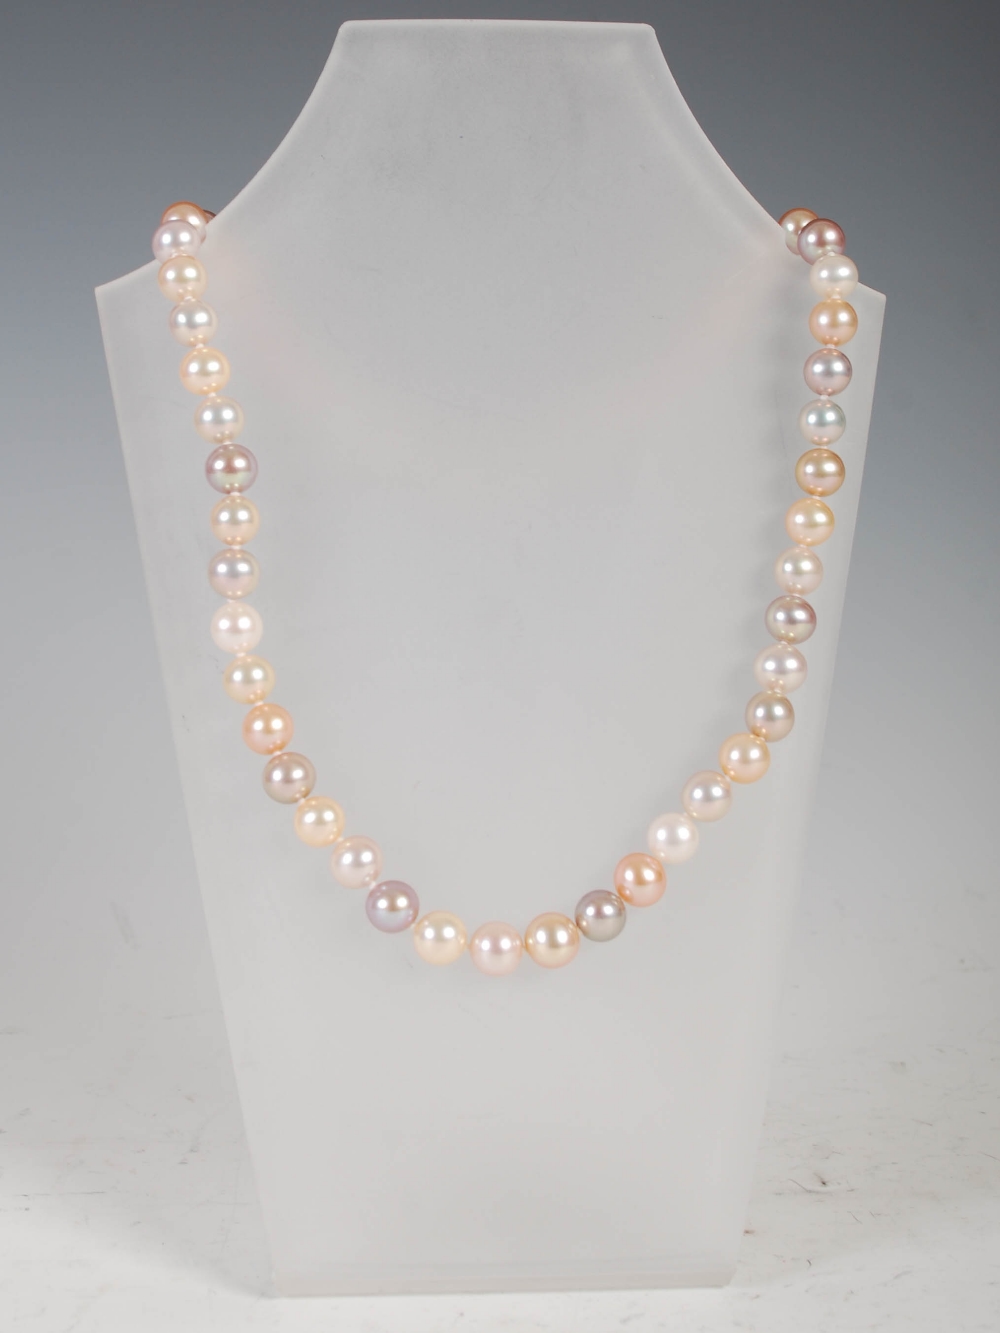 A cultured pearl necklace, with fifty three slightly off round high lustre pearls in various